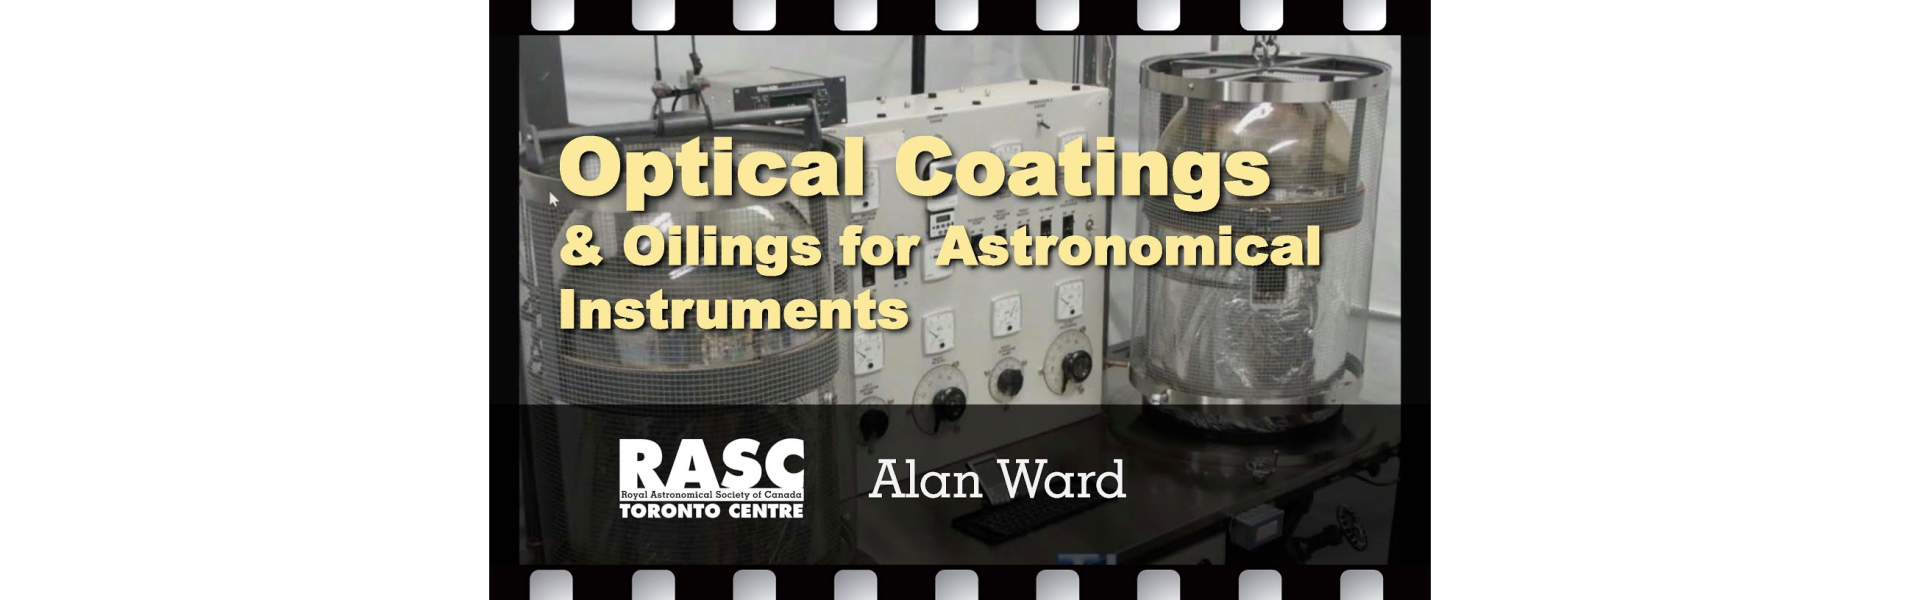 Optical Coatings & Oilings for Astronomical Instruments